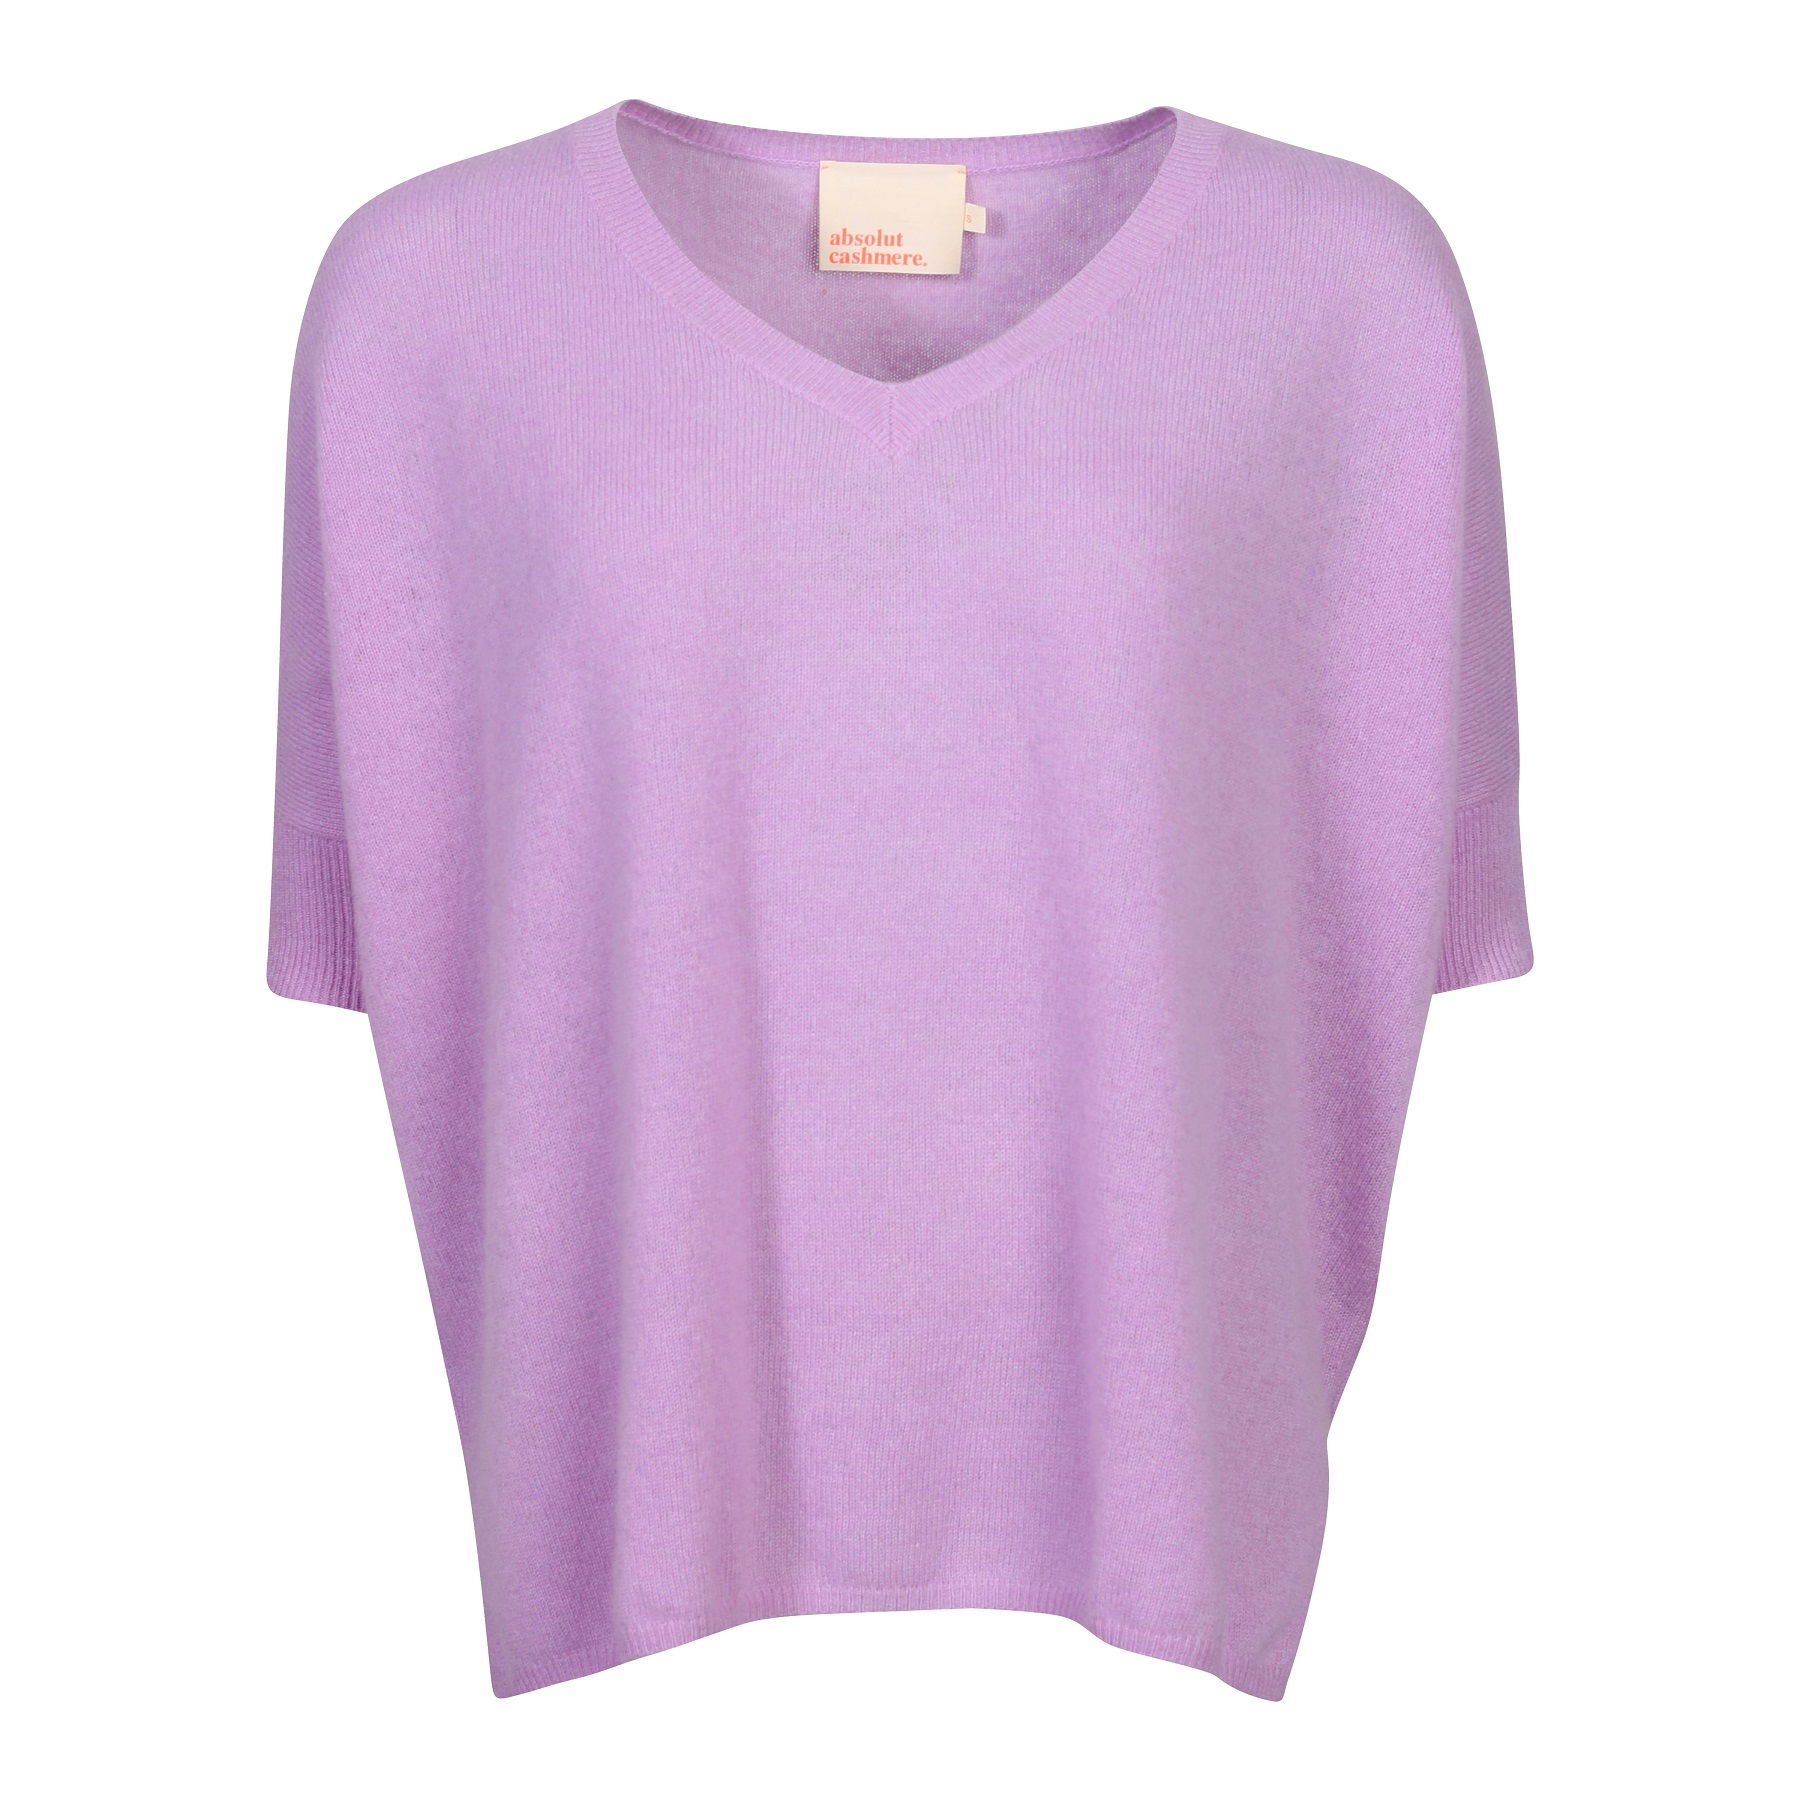 Absolut Cashmere Poncho Kate in Lilac L